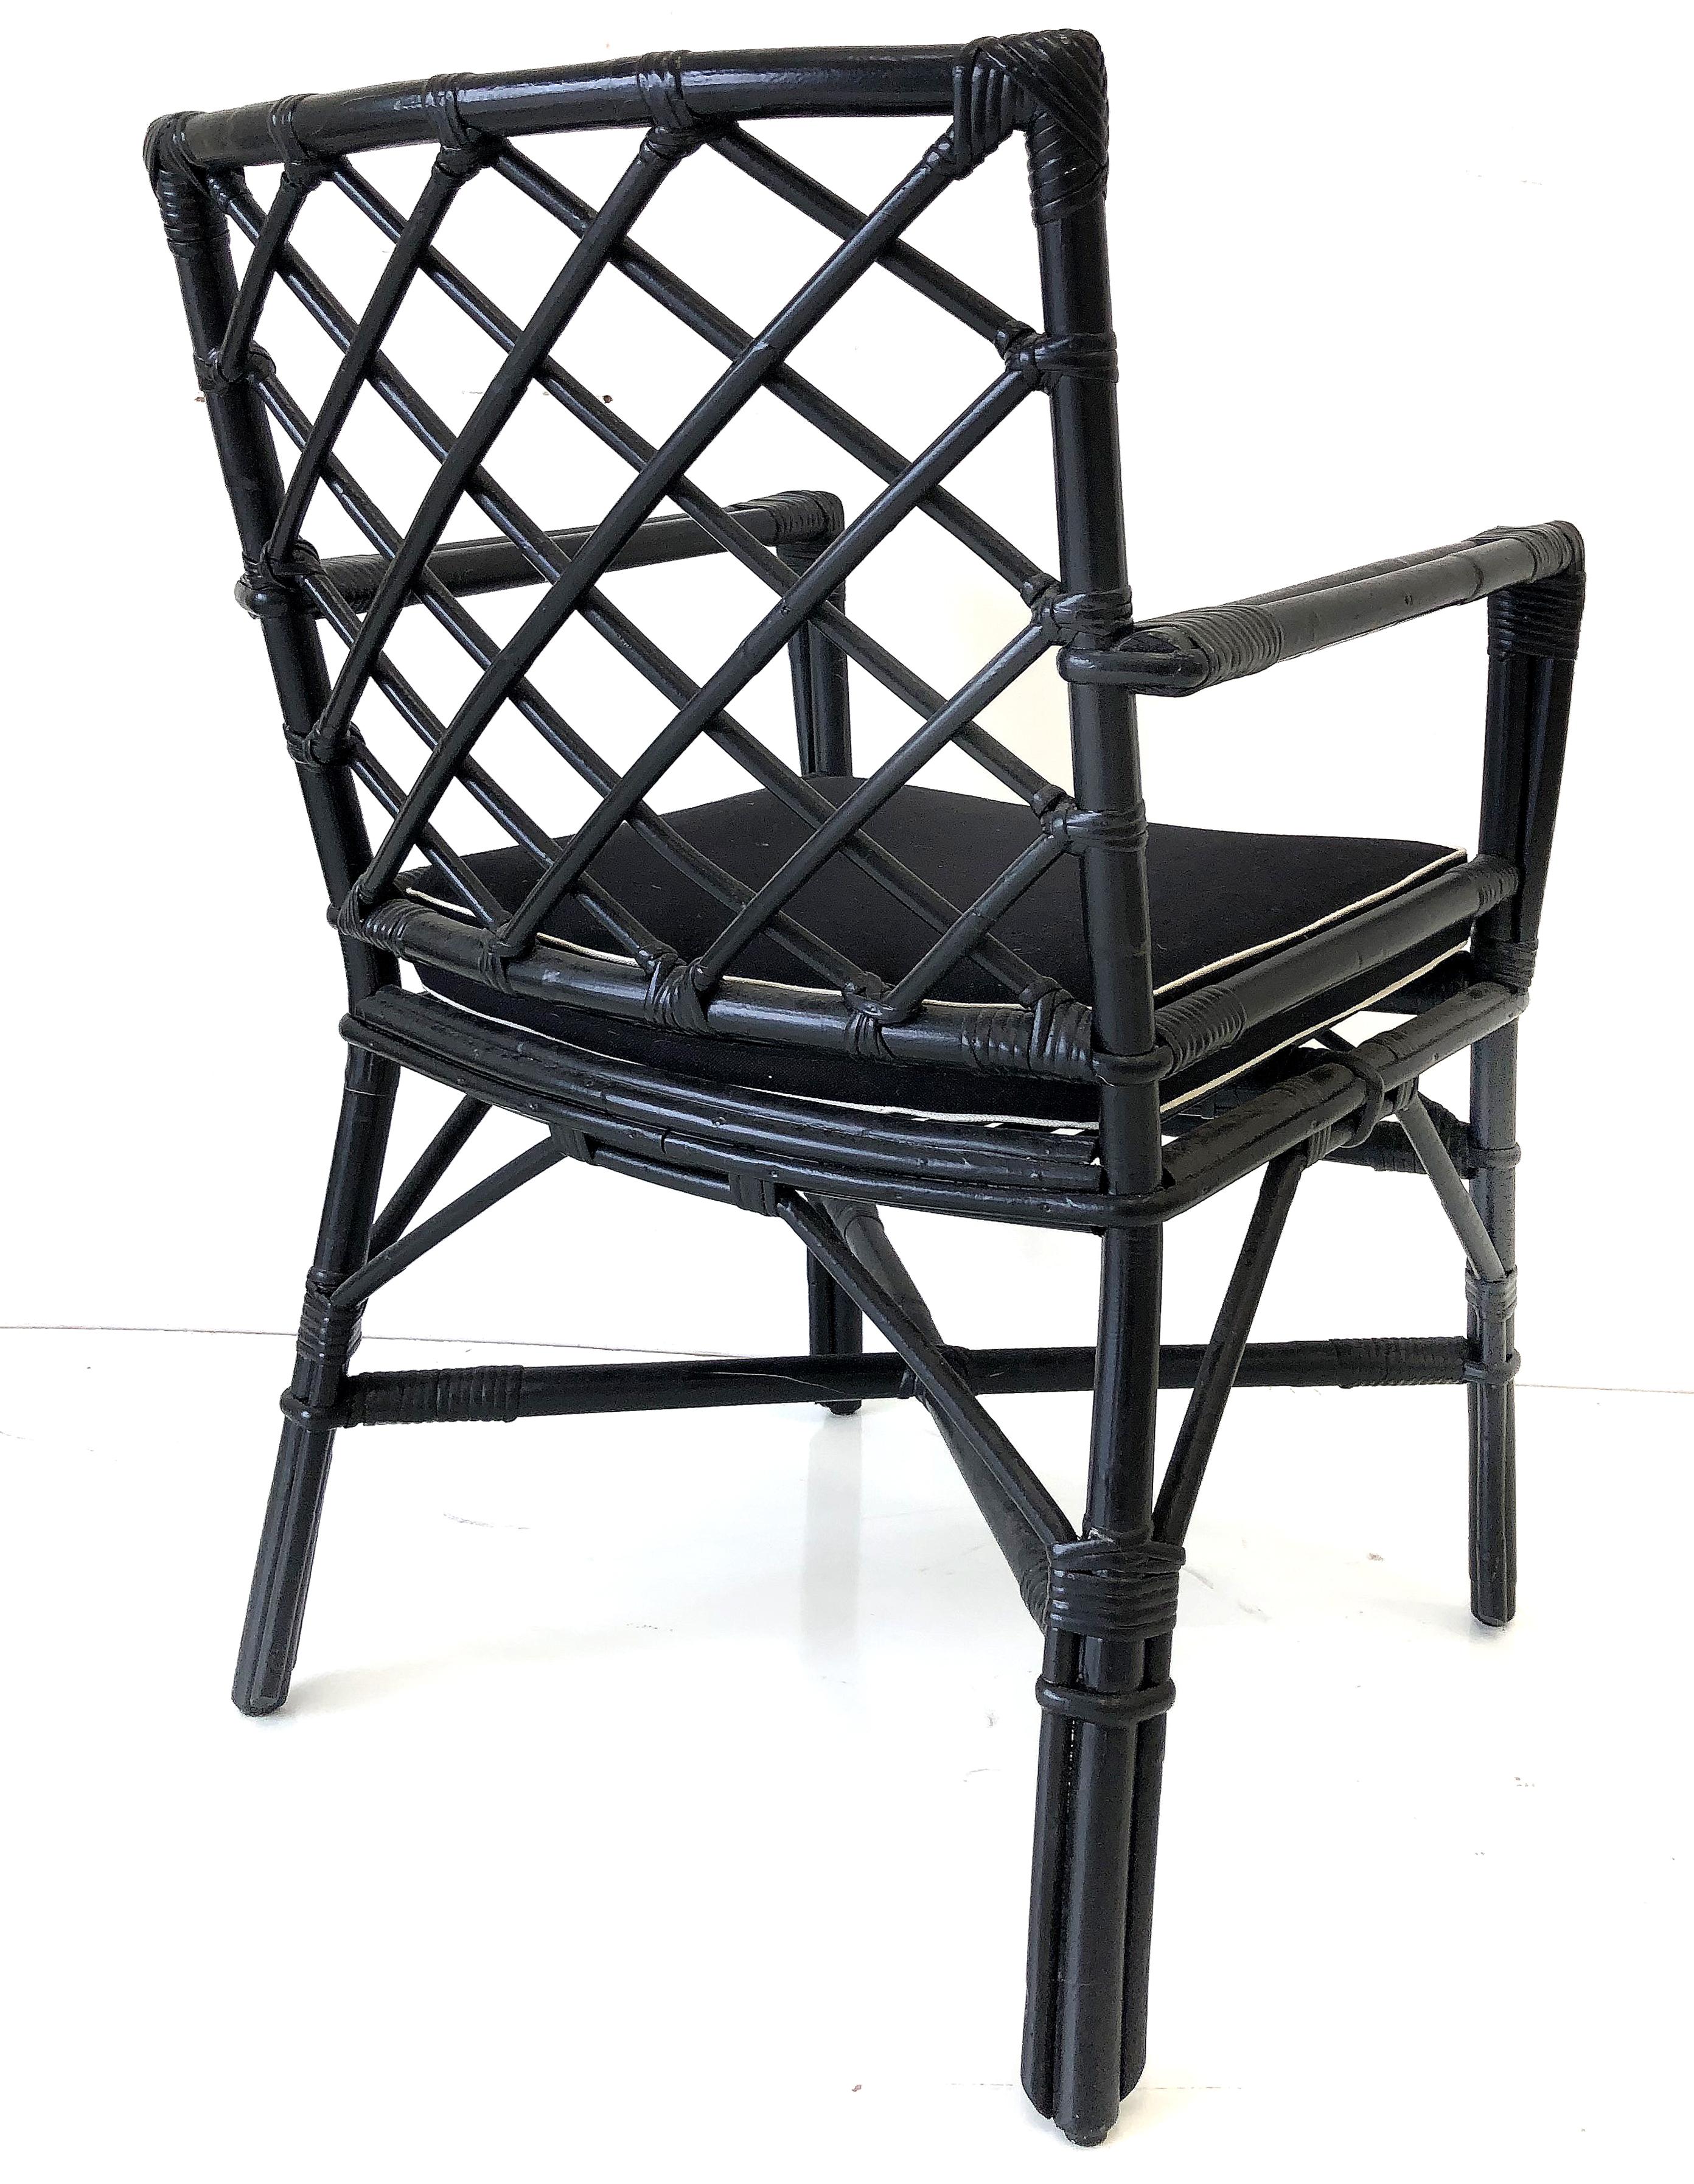 Vintage Coastal Modern rattan set of 6 dining chairs

Offered for sale is a set of 6 vintage Coastal Modern rattan dining chairs with lattice work details. The set has recently been finished in black lacquer and newly upholstered. The set includes